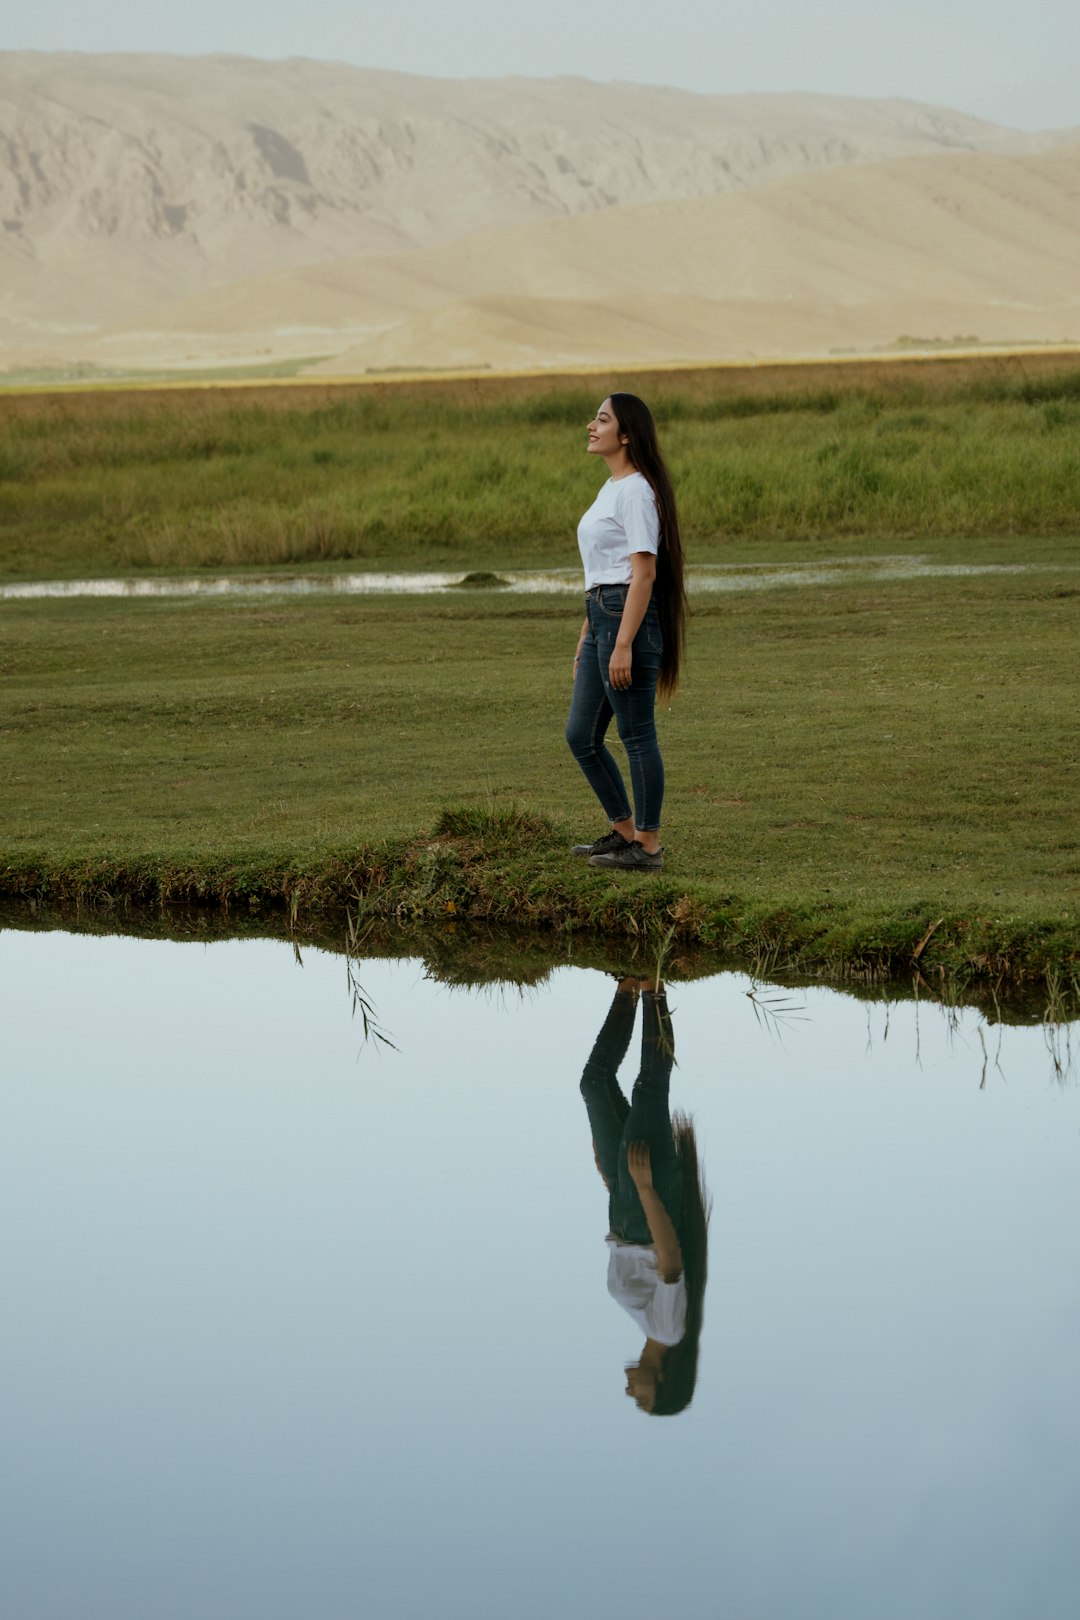 woman in white shirt and black pants standing on green grass field near lake during daytime